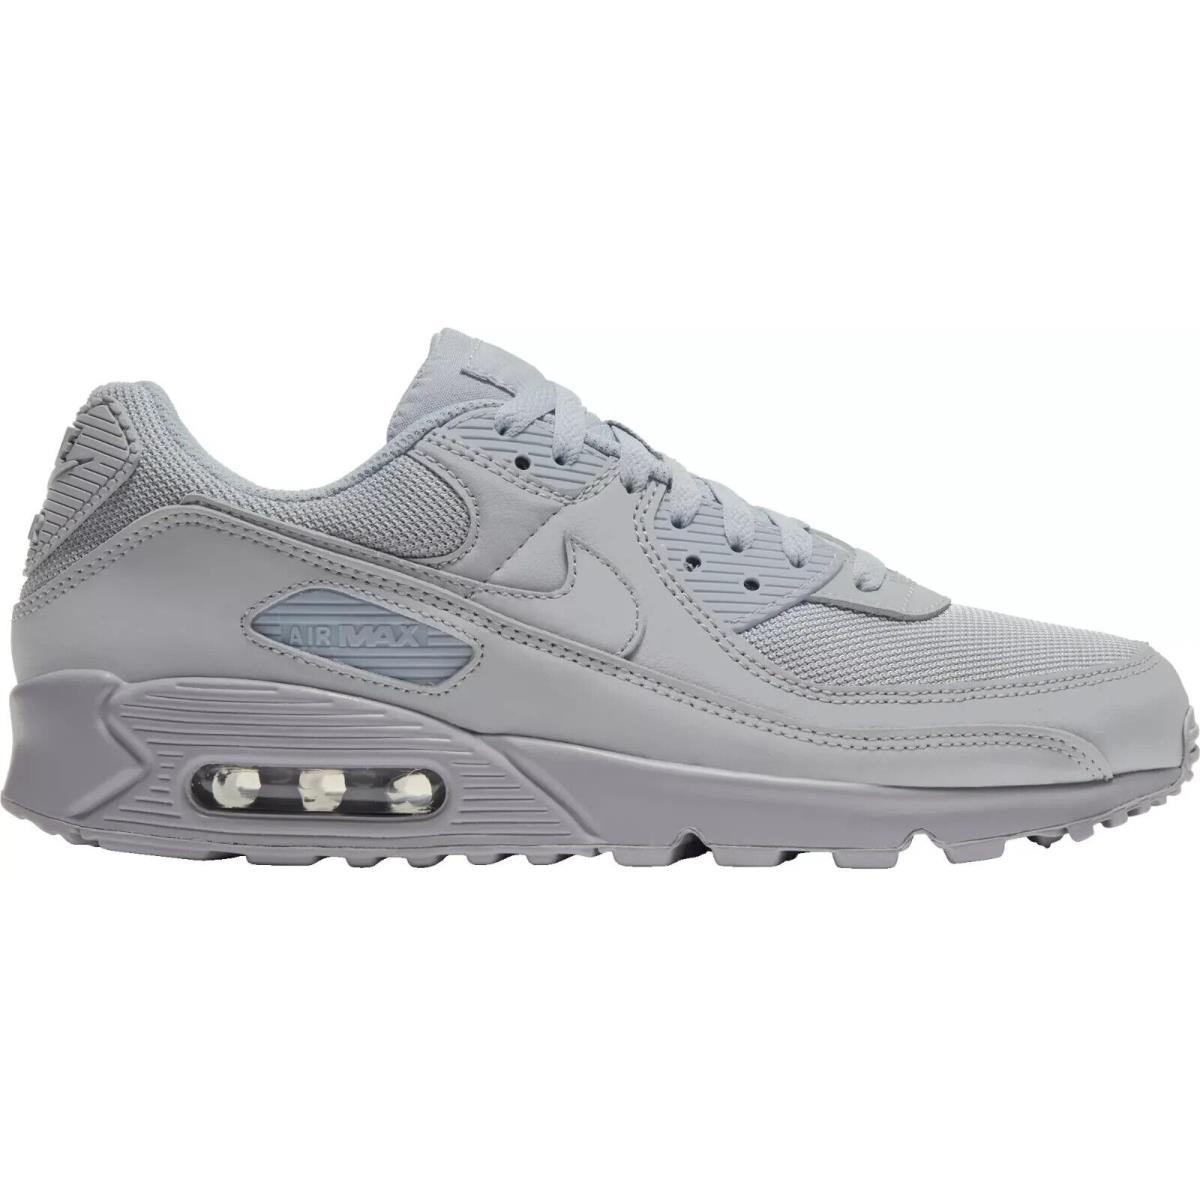 Nike Air Max 90 Men`s Casual Shoes All Colors US Sizes 7-14 Bestseller Wolf Grey/Wolf Grey/Wolf Grey